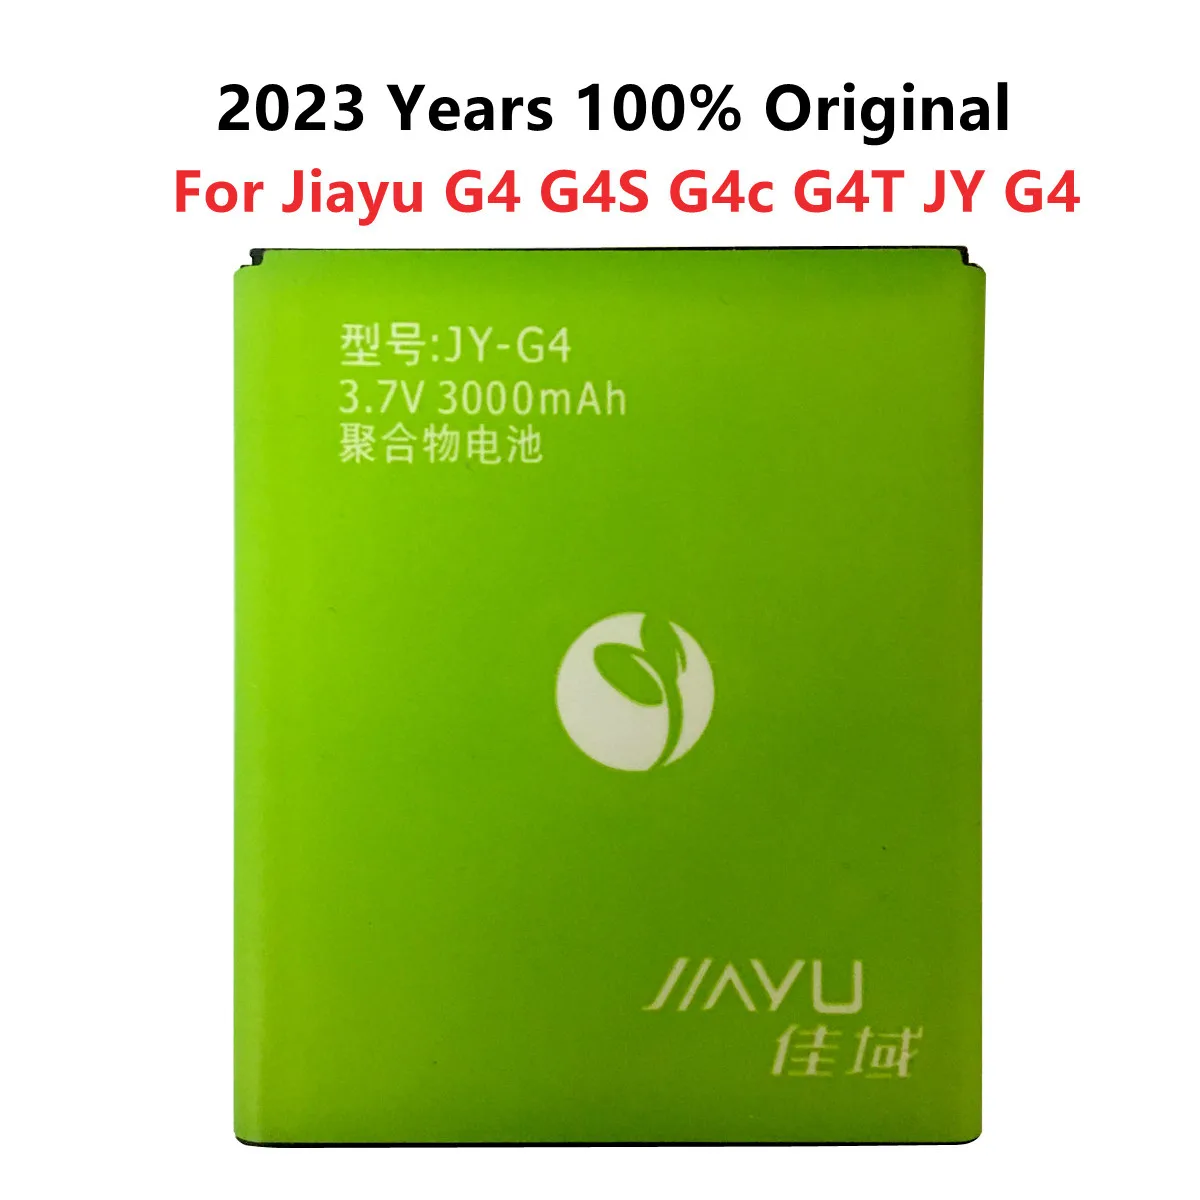 2023 3000mAh Li-ion JY-G4 Battery For JIAYU G4 G4S G4c G4T JYG4 JY G4 Mobile Phone Replacement Batteries 3.7V Recharge